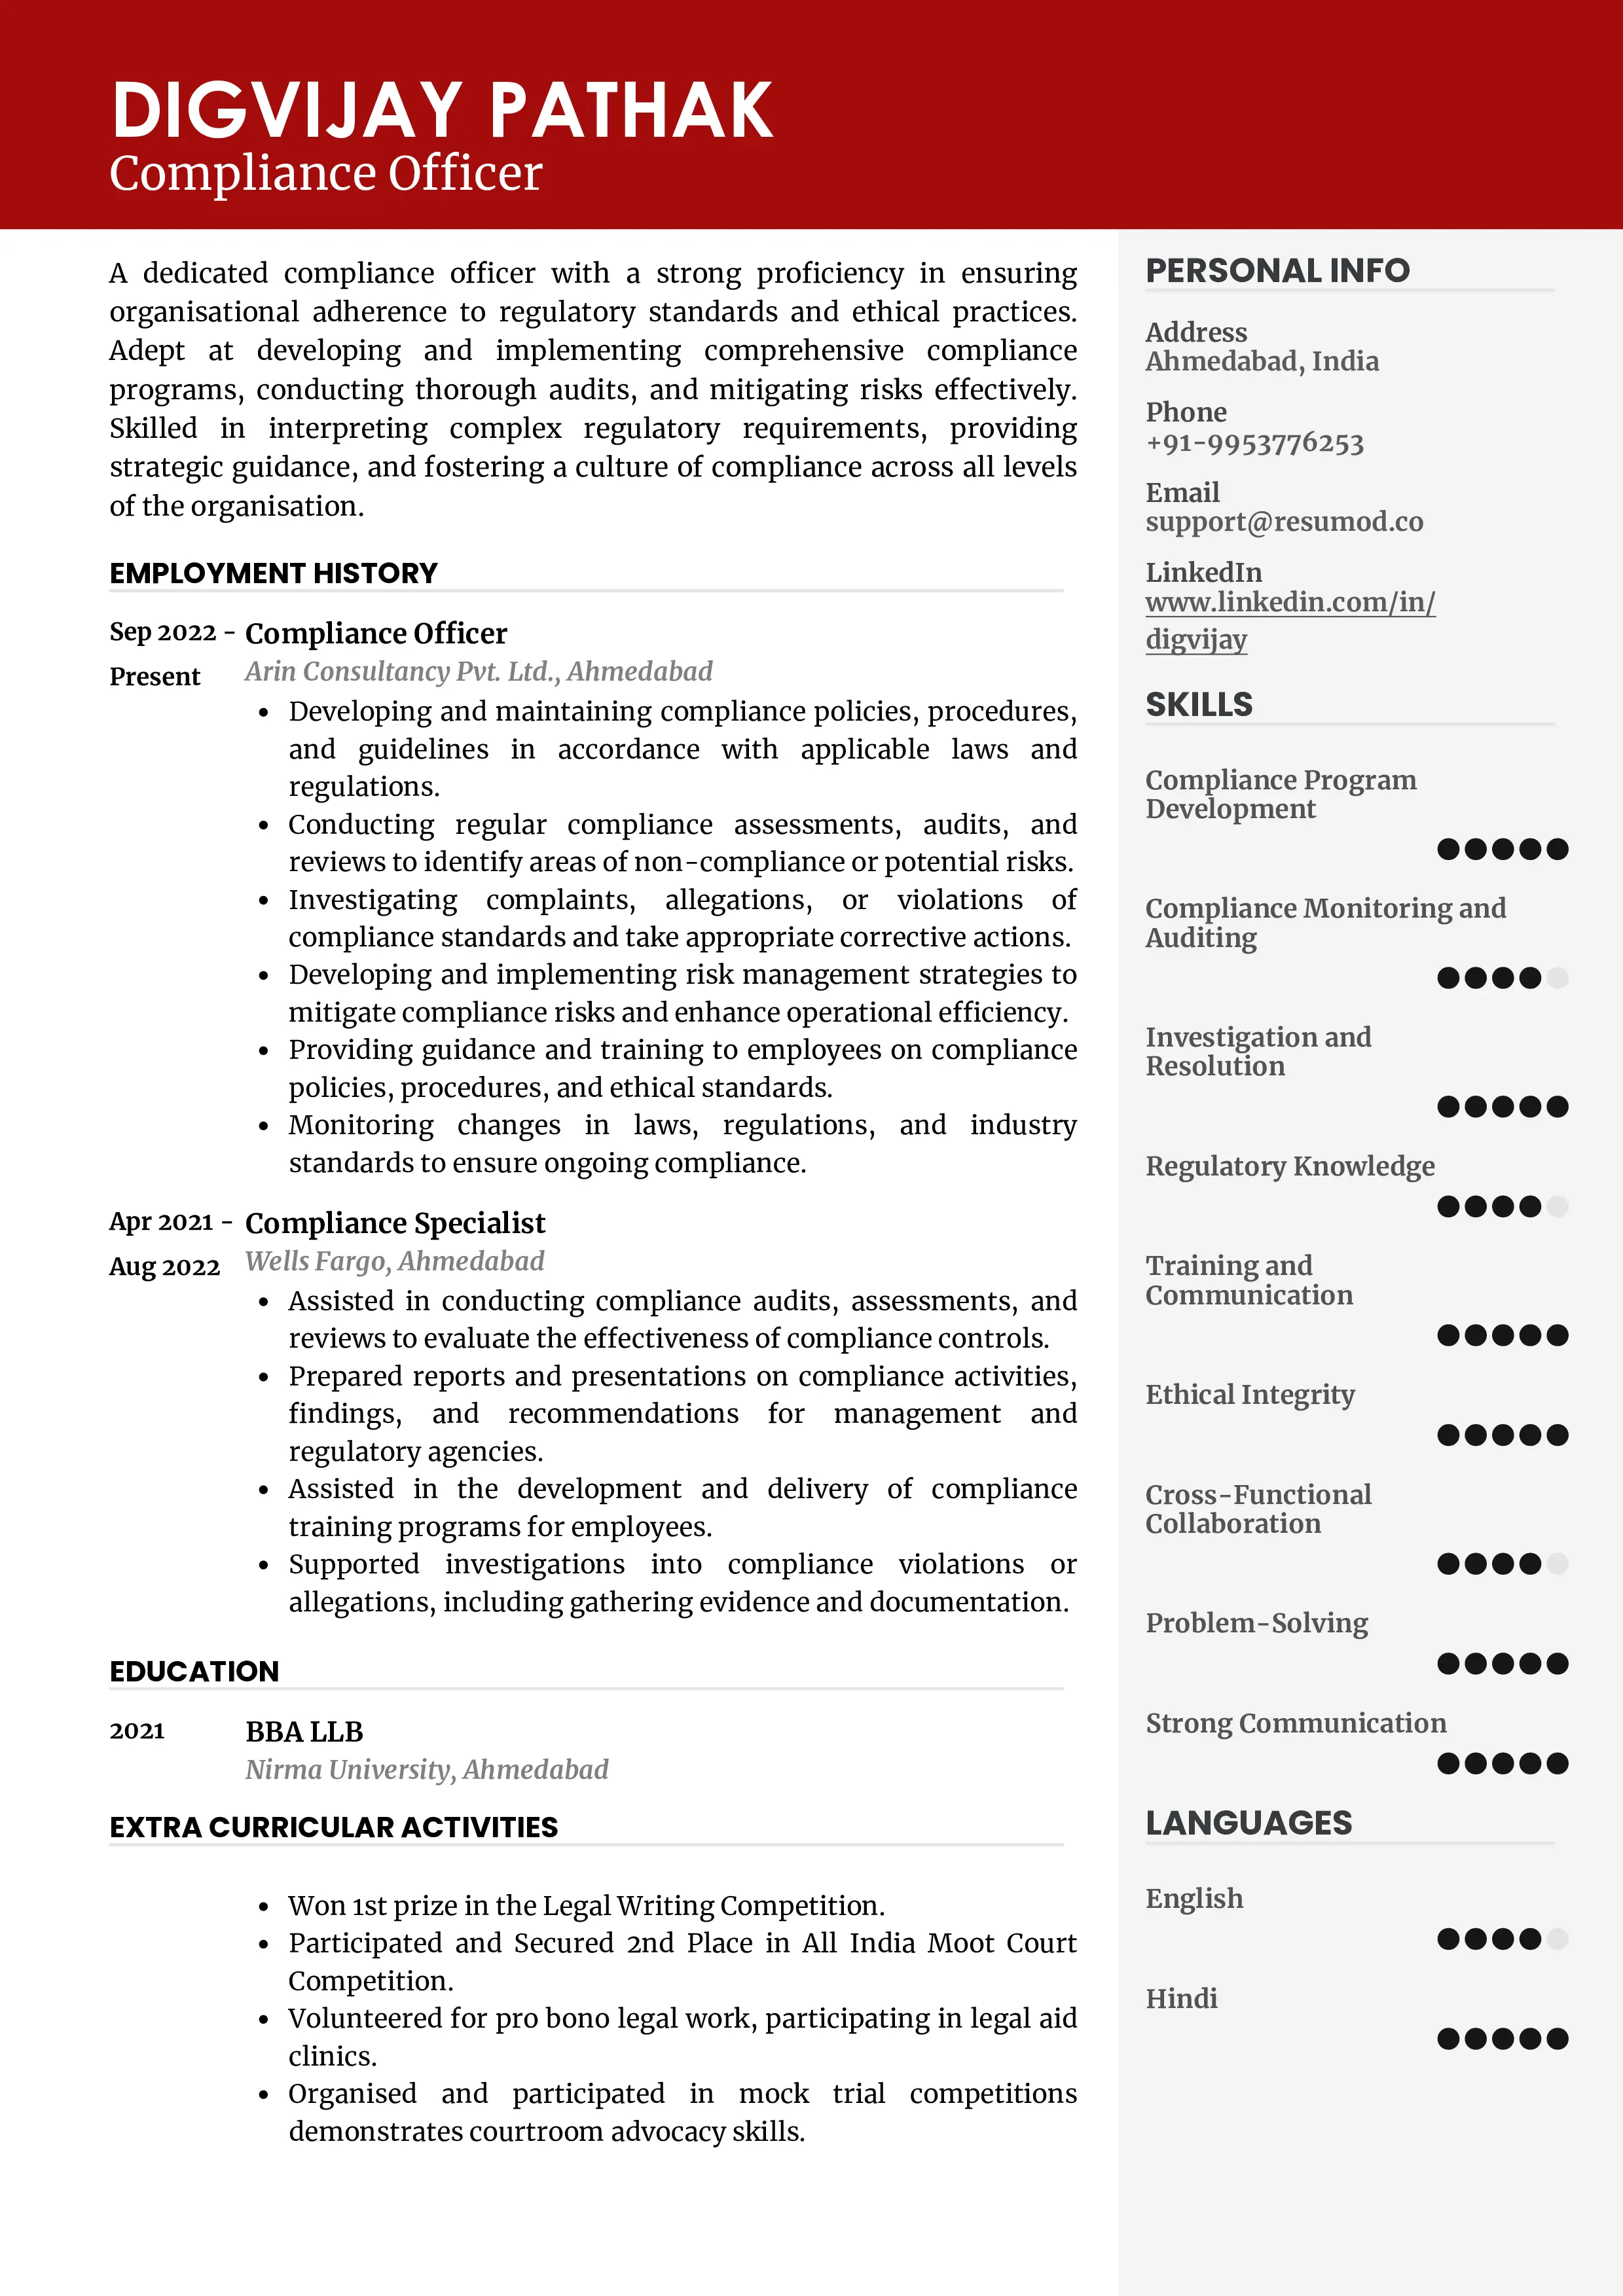 Sample Resume of Compliance Officer | Free Resume Templates & Samples on Resumod.co